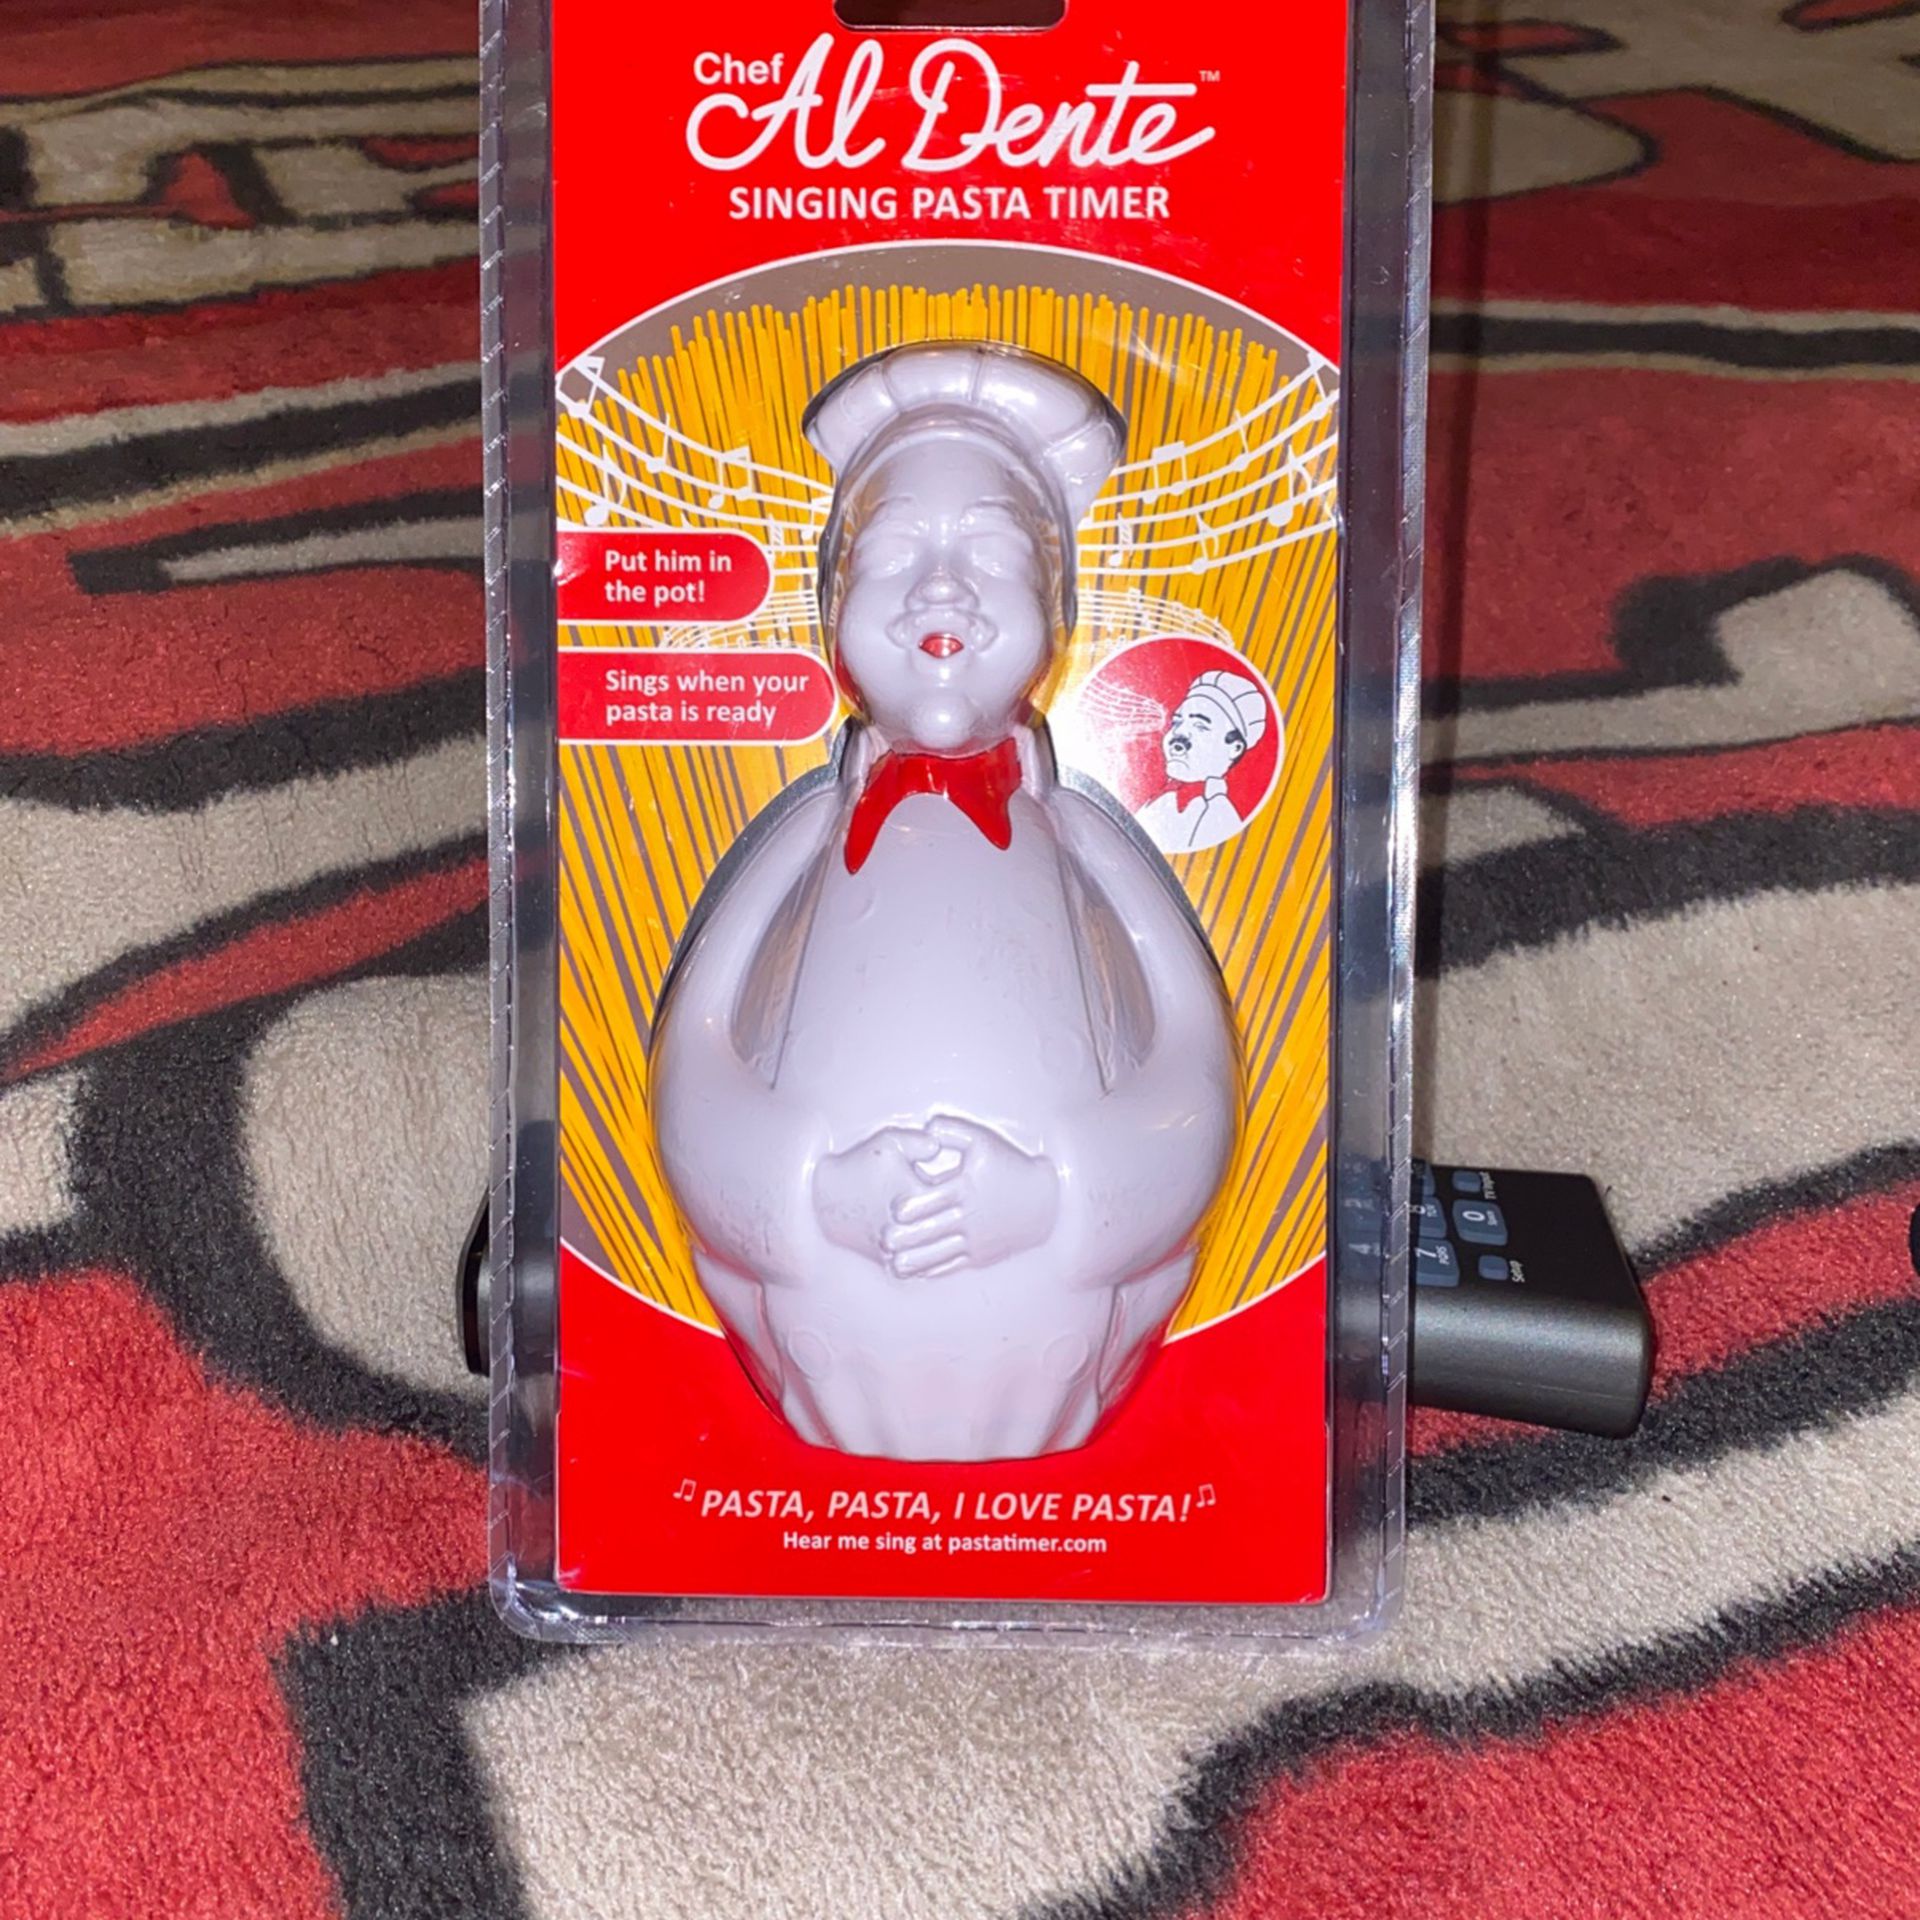 Chef Al Dente Singing Pasta Timer by Smart Touch Model Pasta01 for